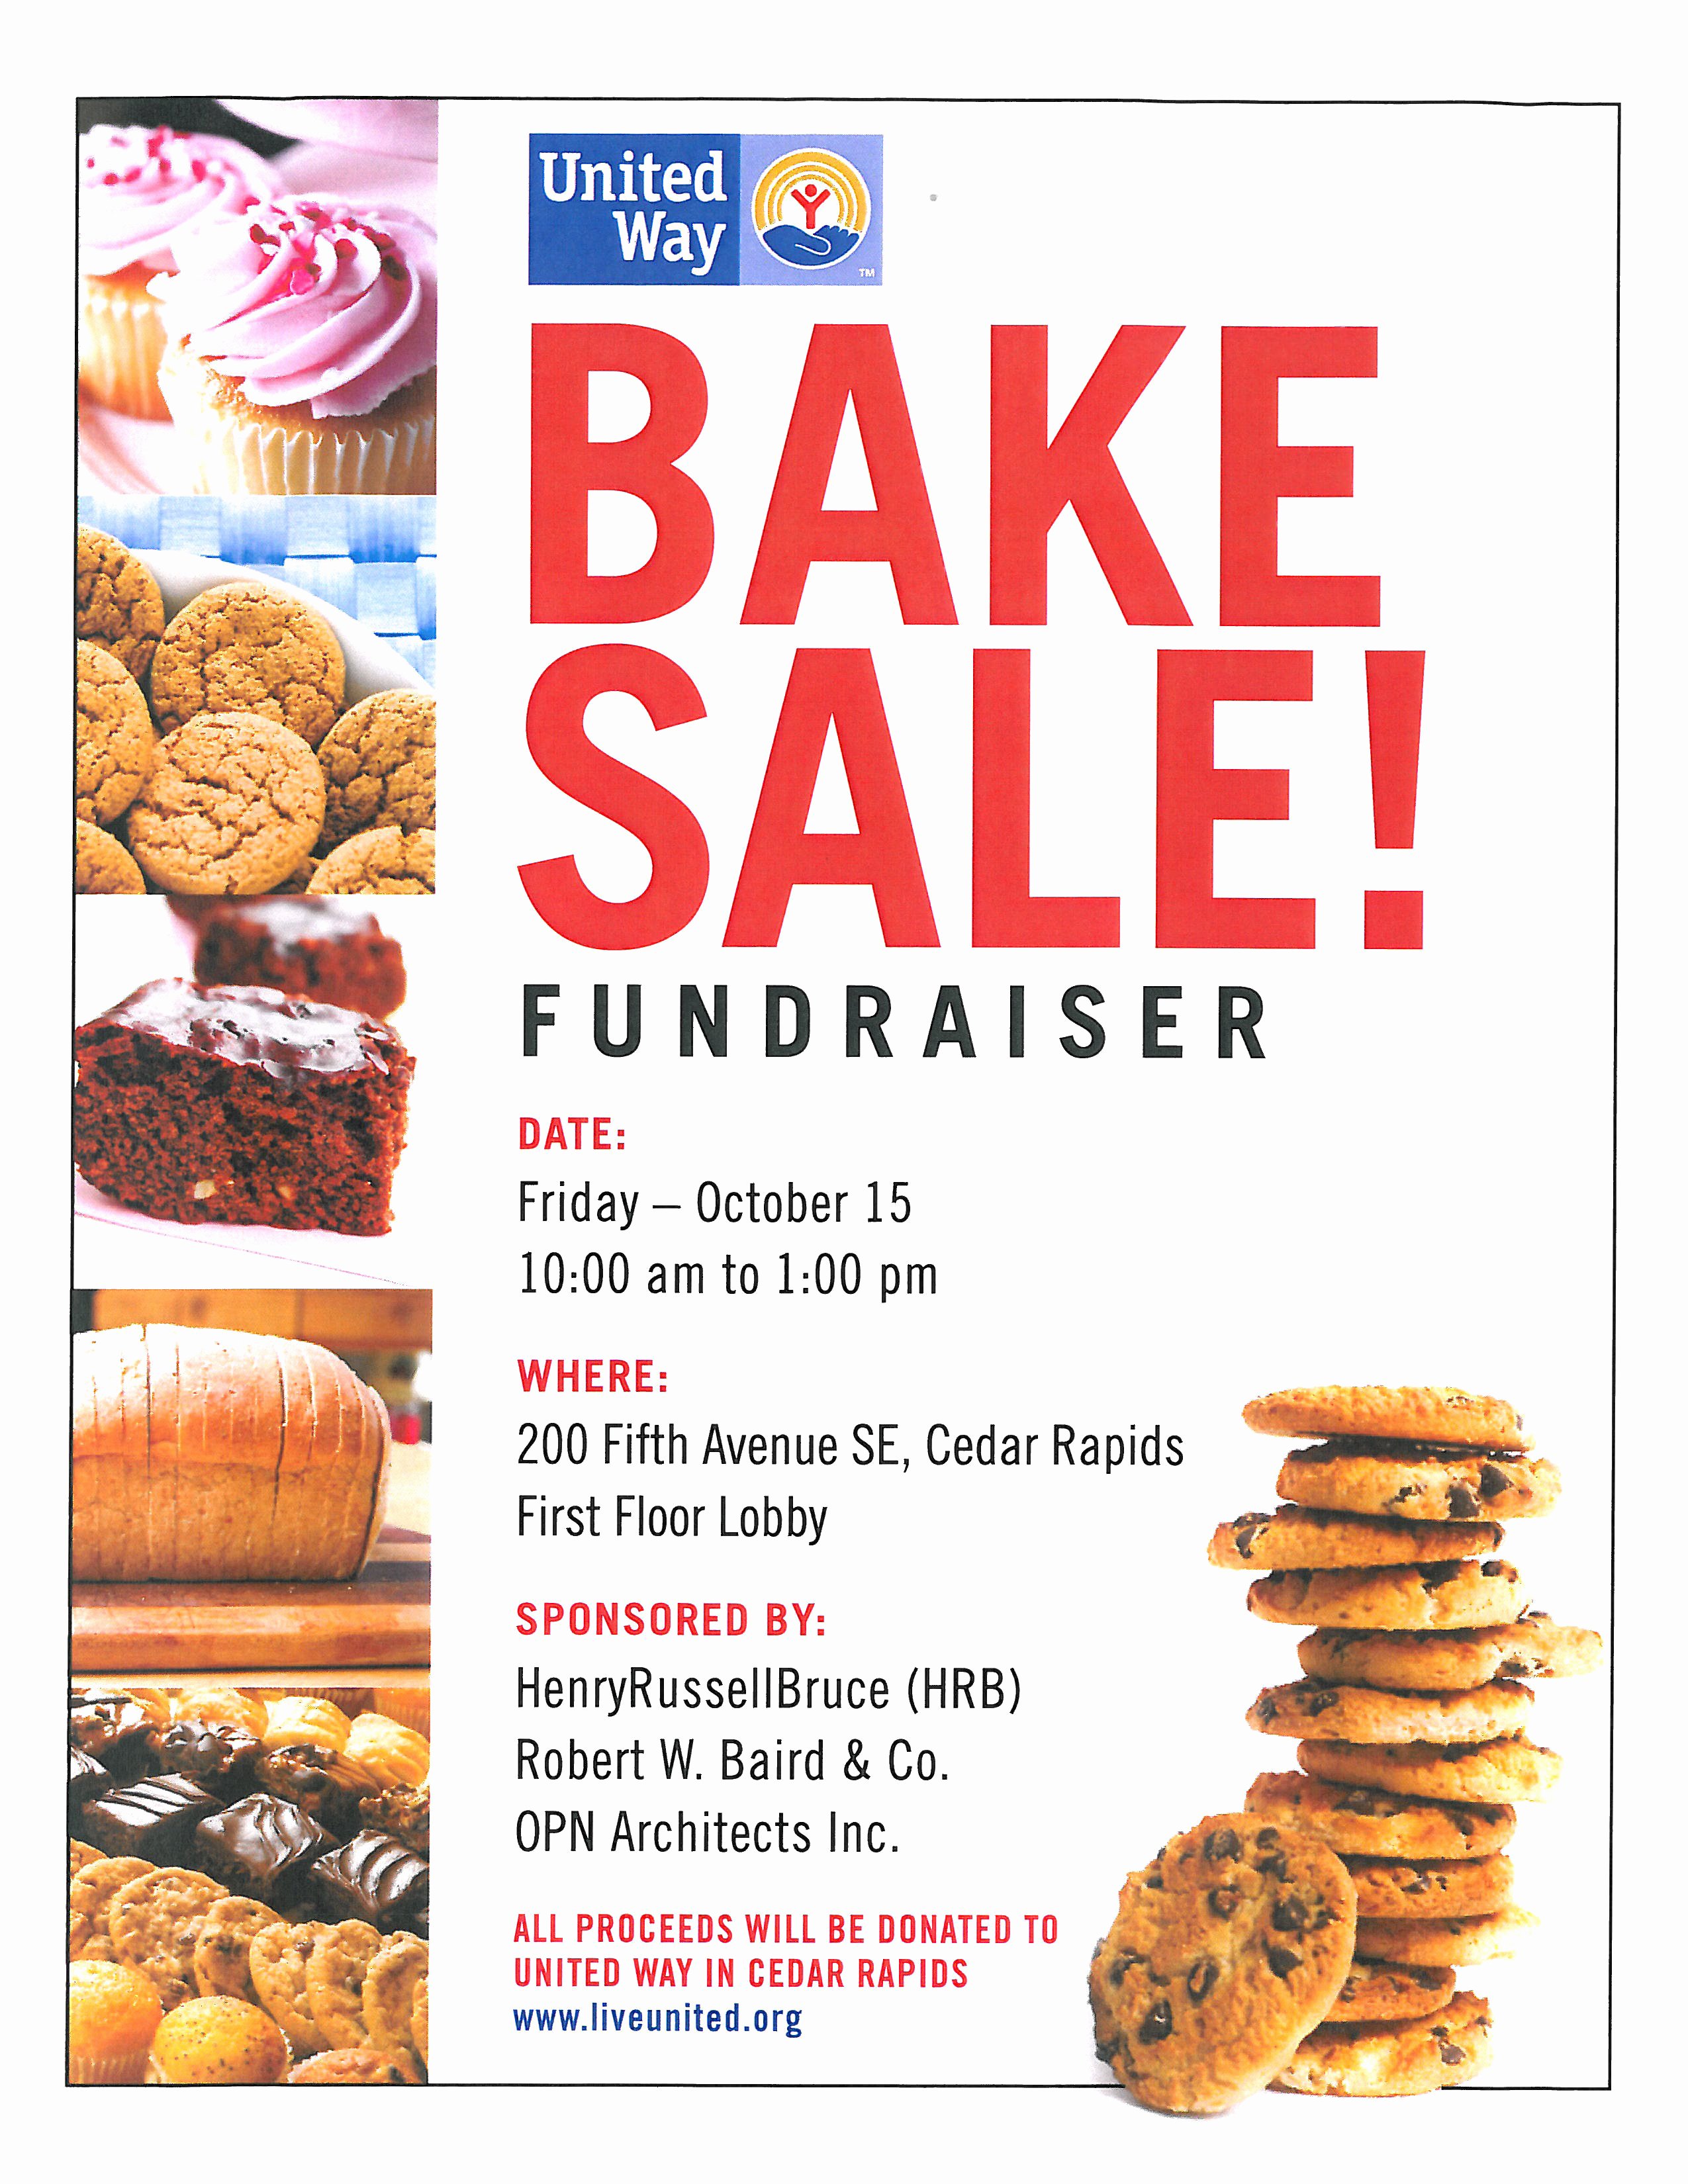 Bake Sale Fundraiser Flyer Template Inspirational Word Design Gallery Category Page 12 Designtos